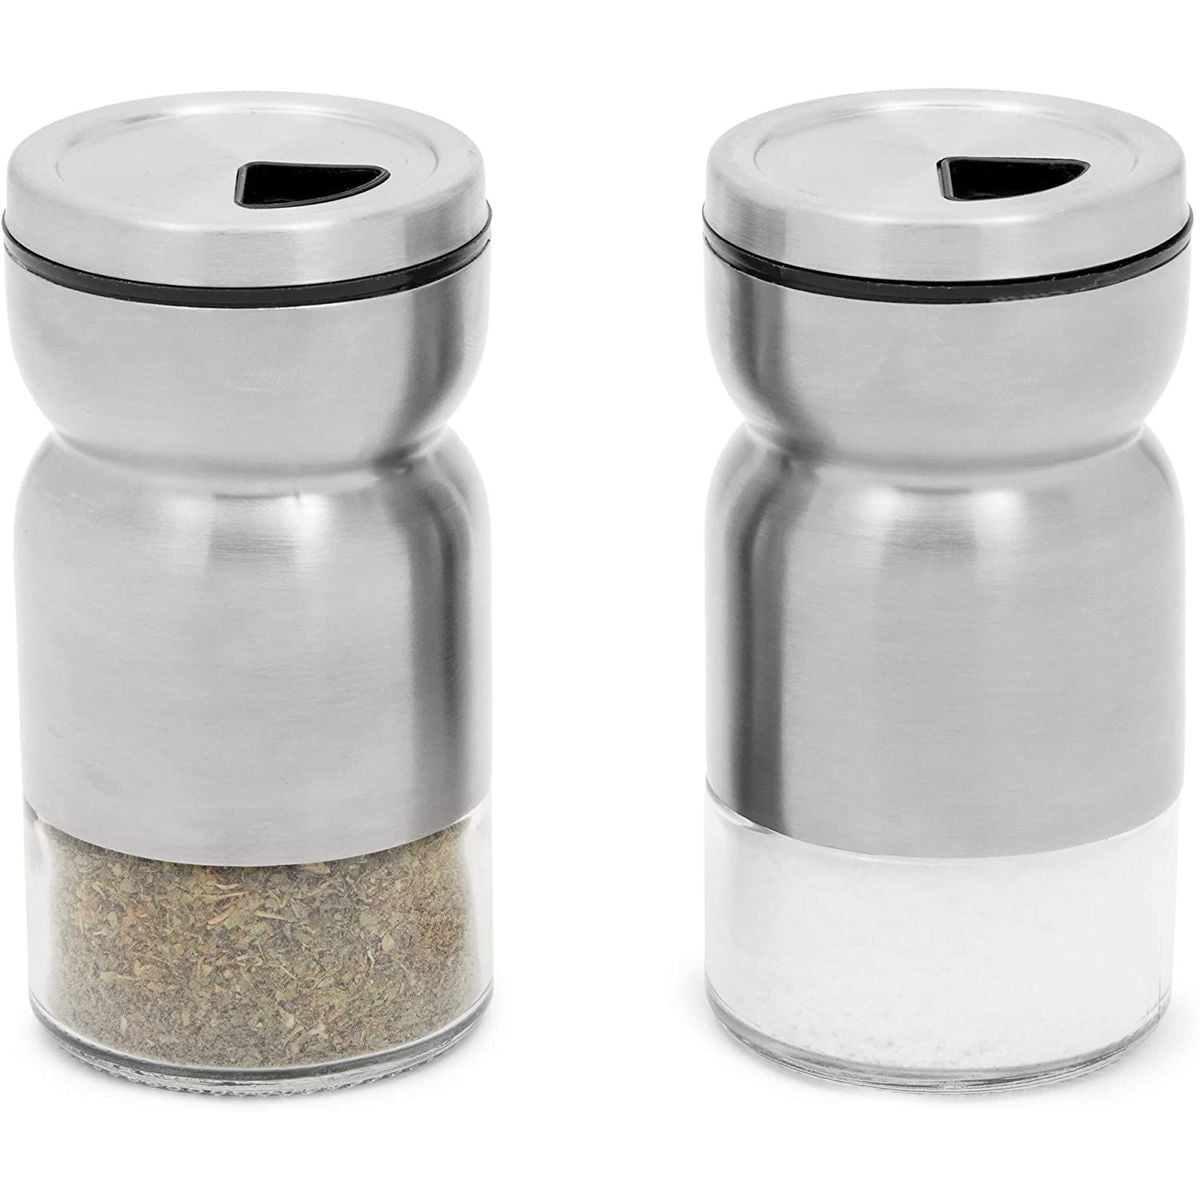 Lighthouse salt and pepper shakers